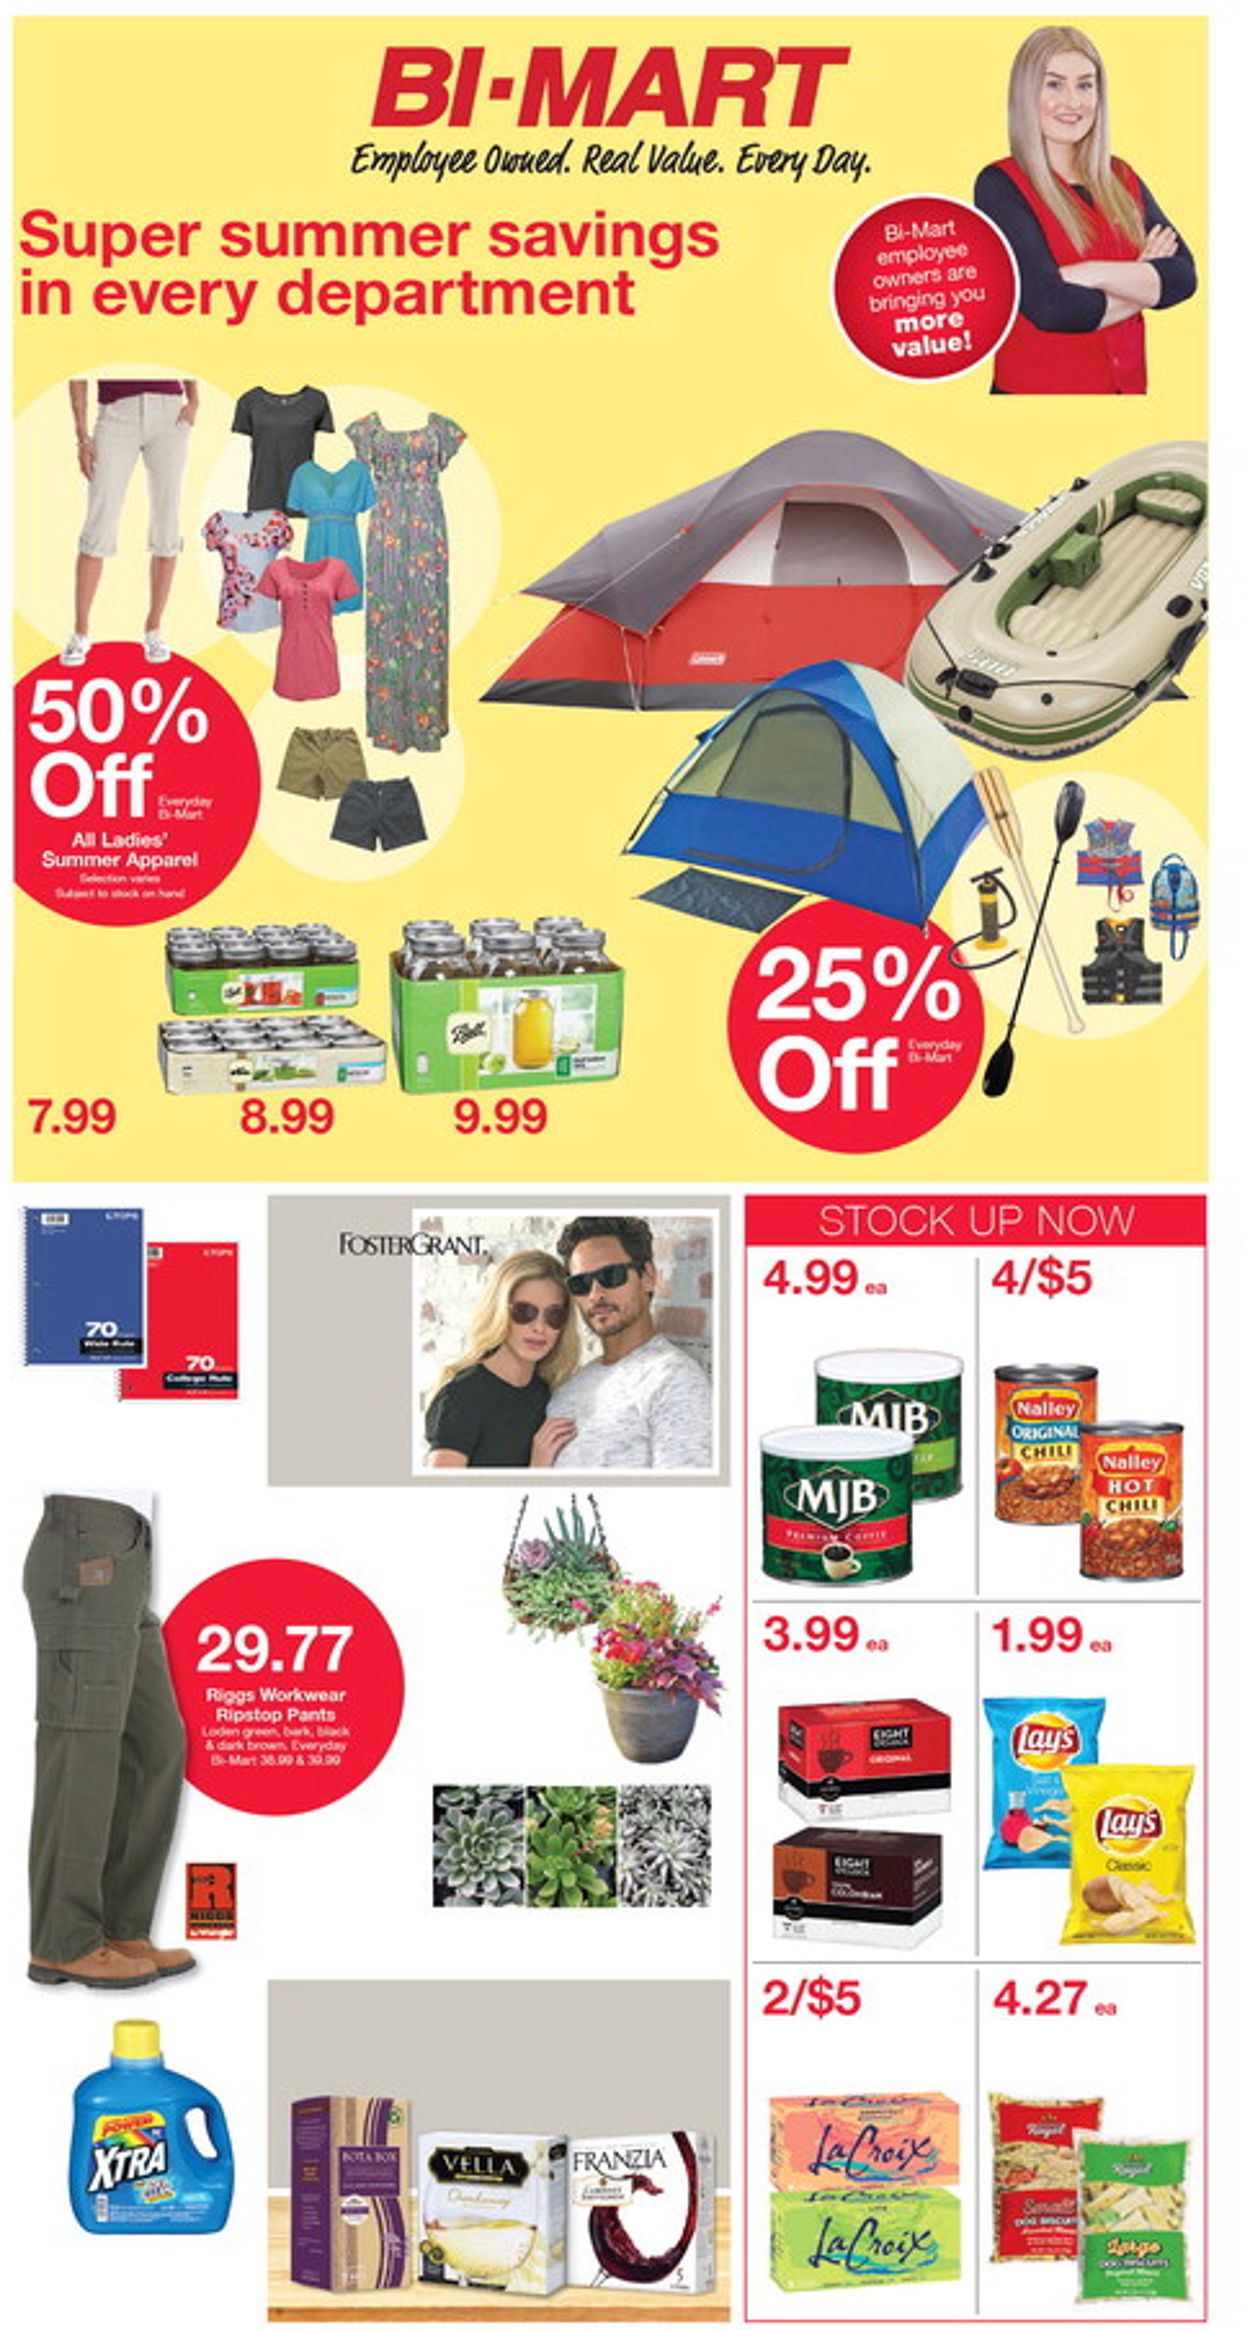 Bi-Mart Current weekly ad 08/15 - 08/21/2019 - frequent ...